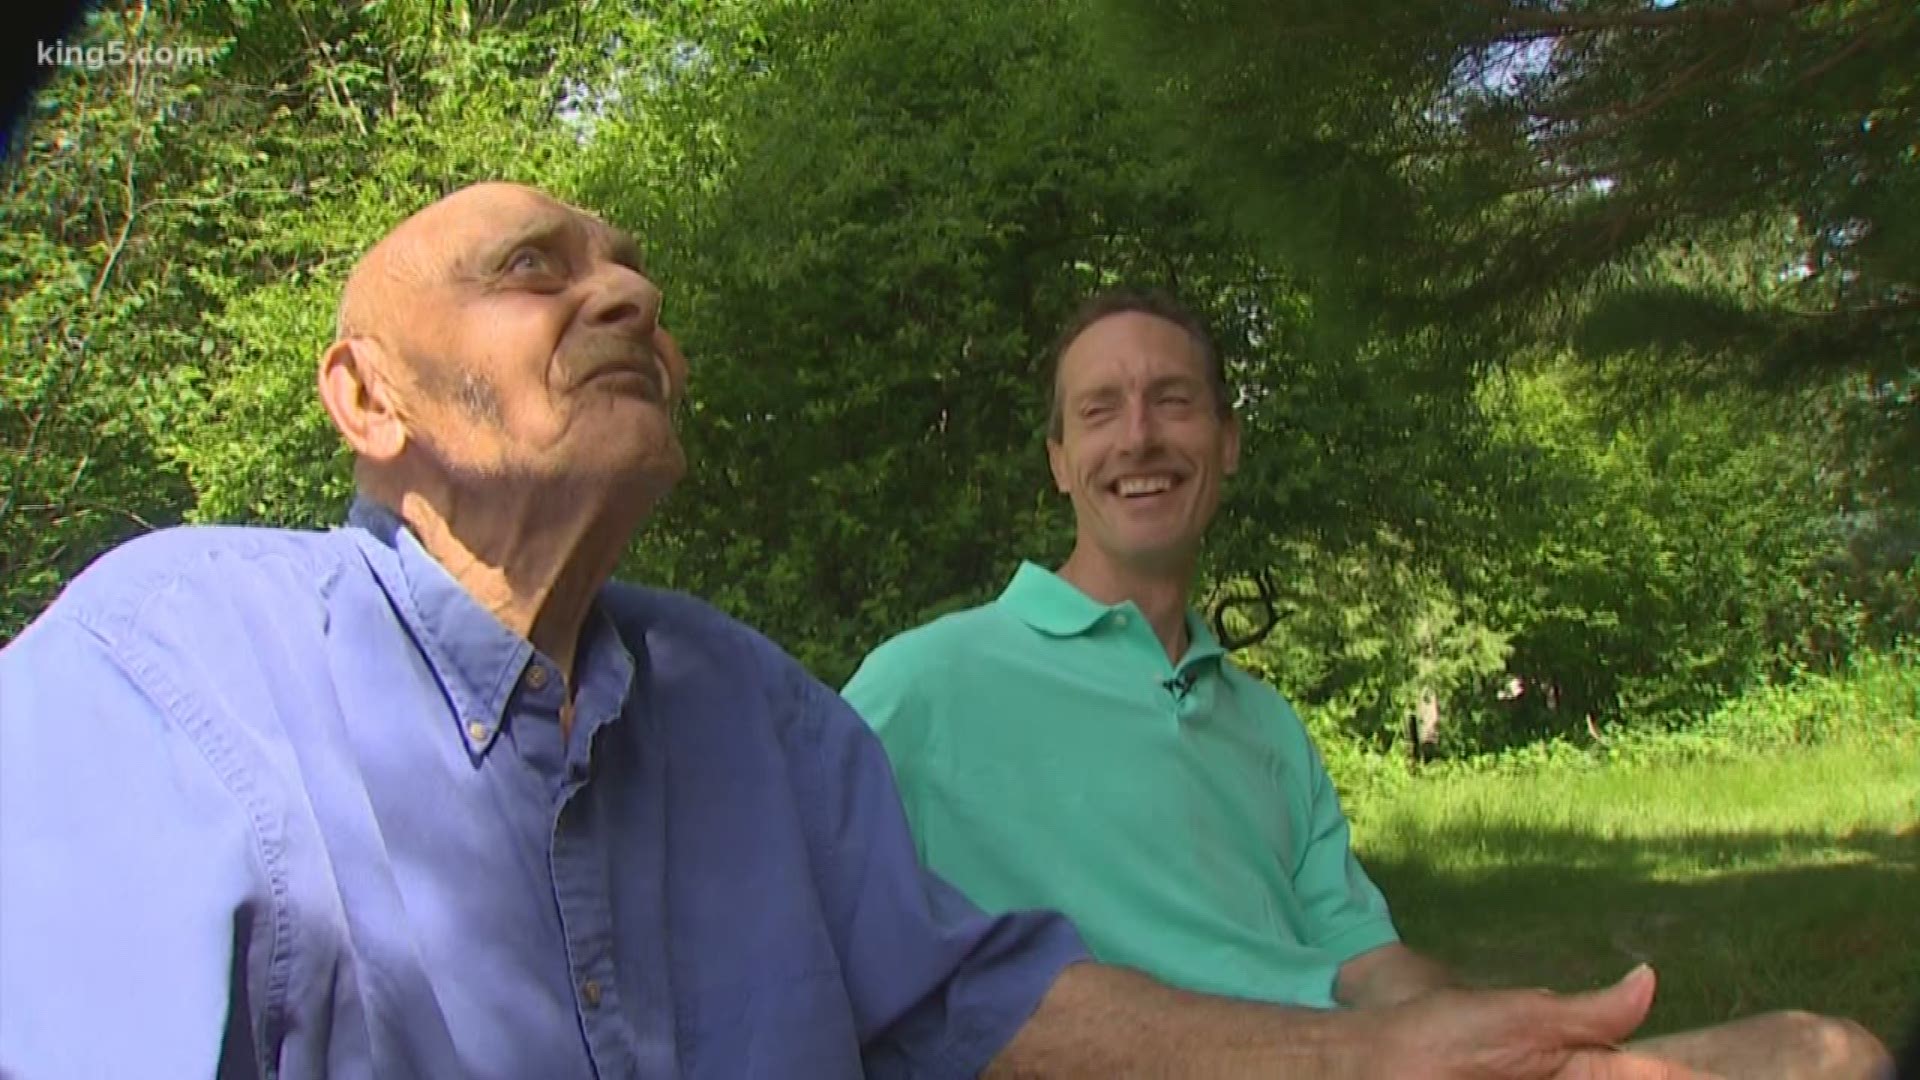 A 96-year-old is grateful for life-- and shares his stories and journey with a once-stranger.